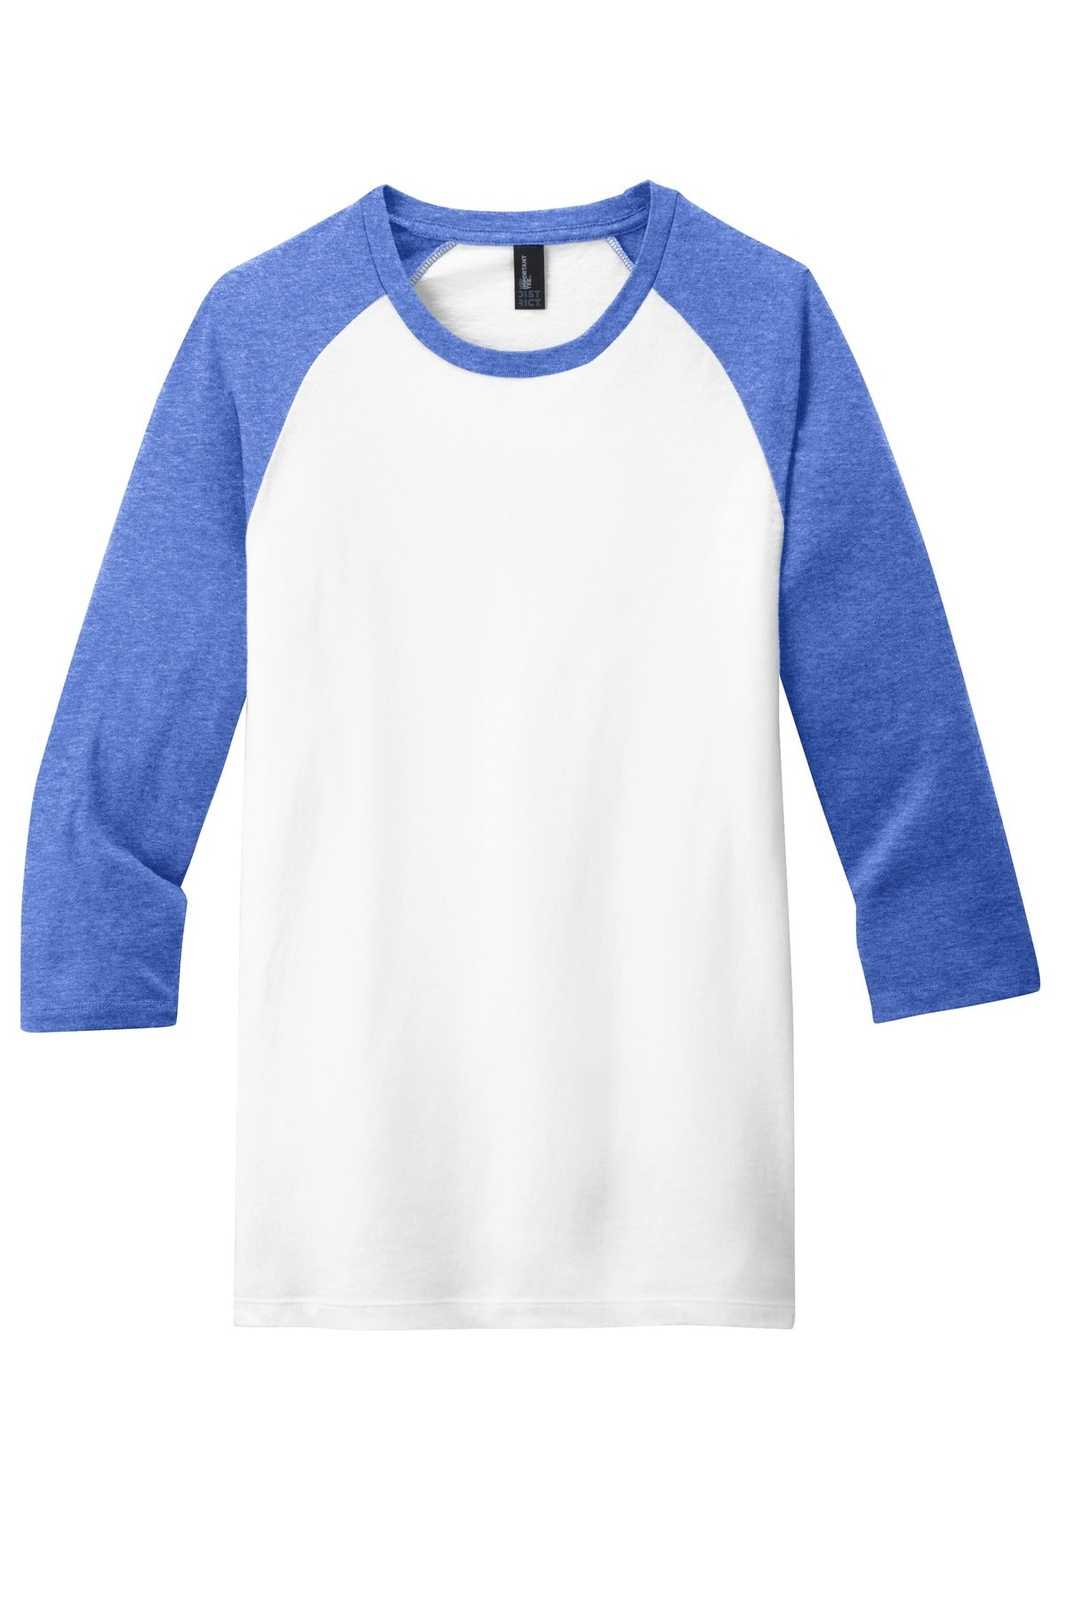 District DT6210 Very Important Tee 3/4-Sleeve Raglan - Royal Frost White - HIT a Double - 5